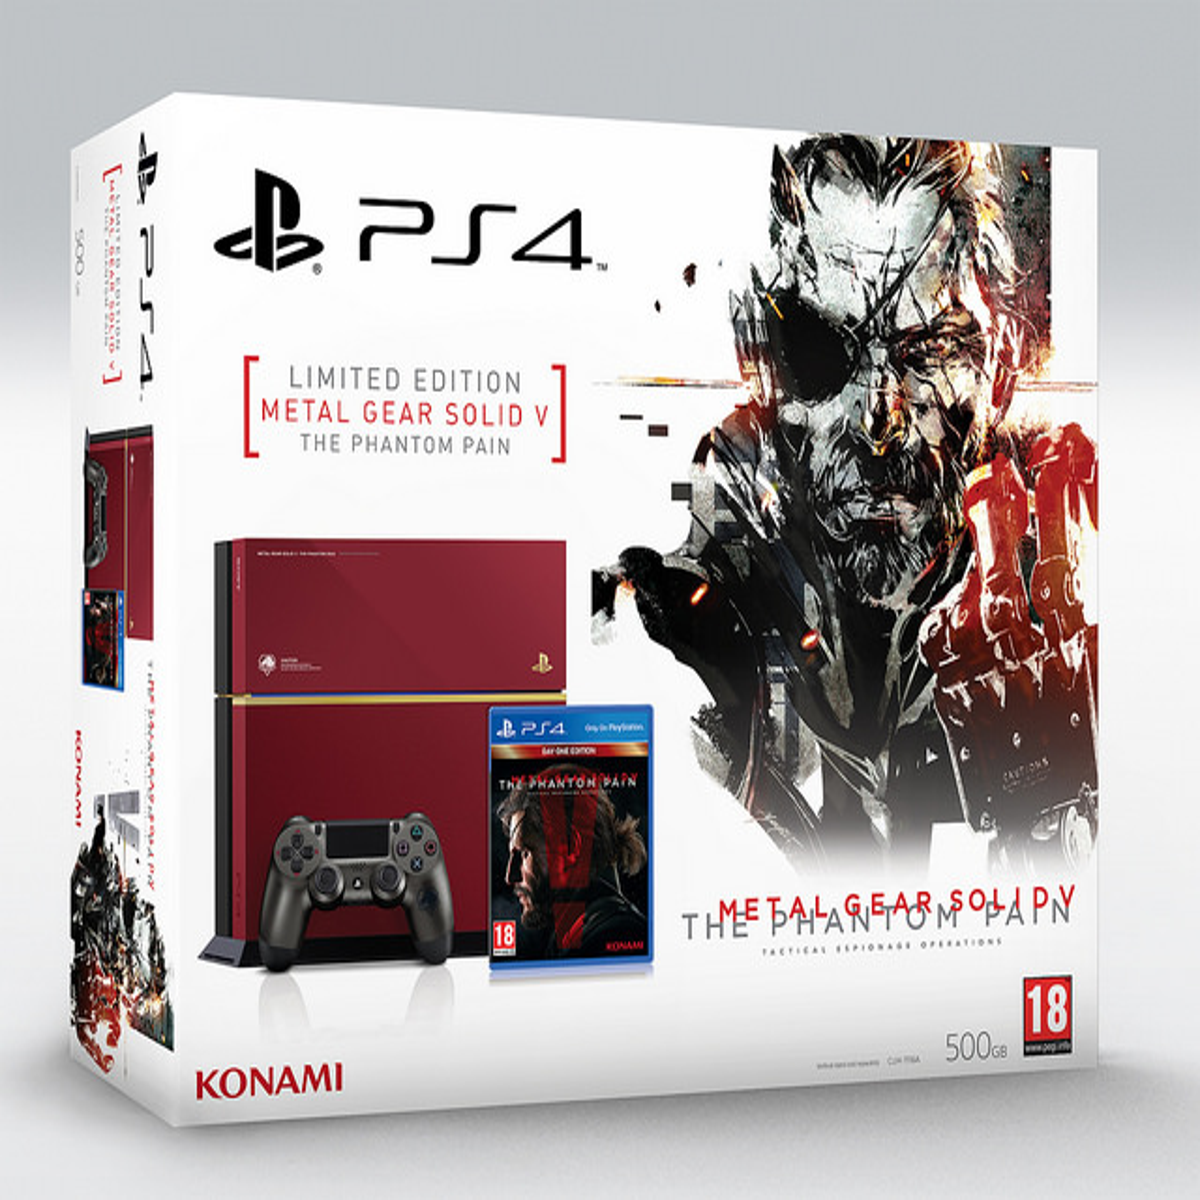 The Metal Gear Solid 5 Limited Edition PS4 is available to pre